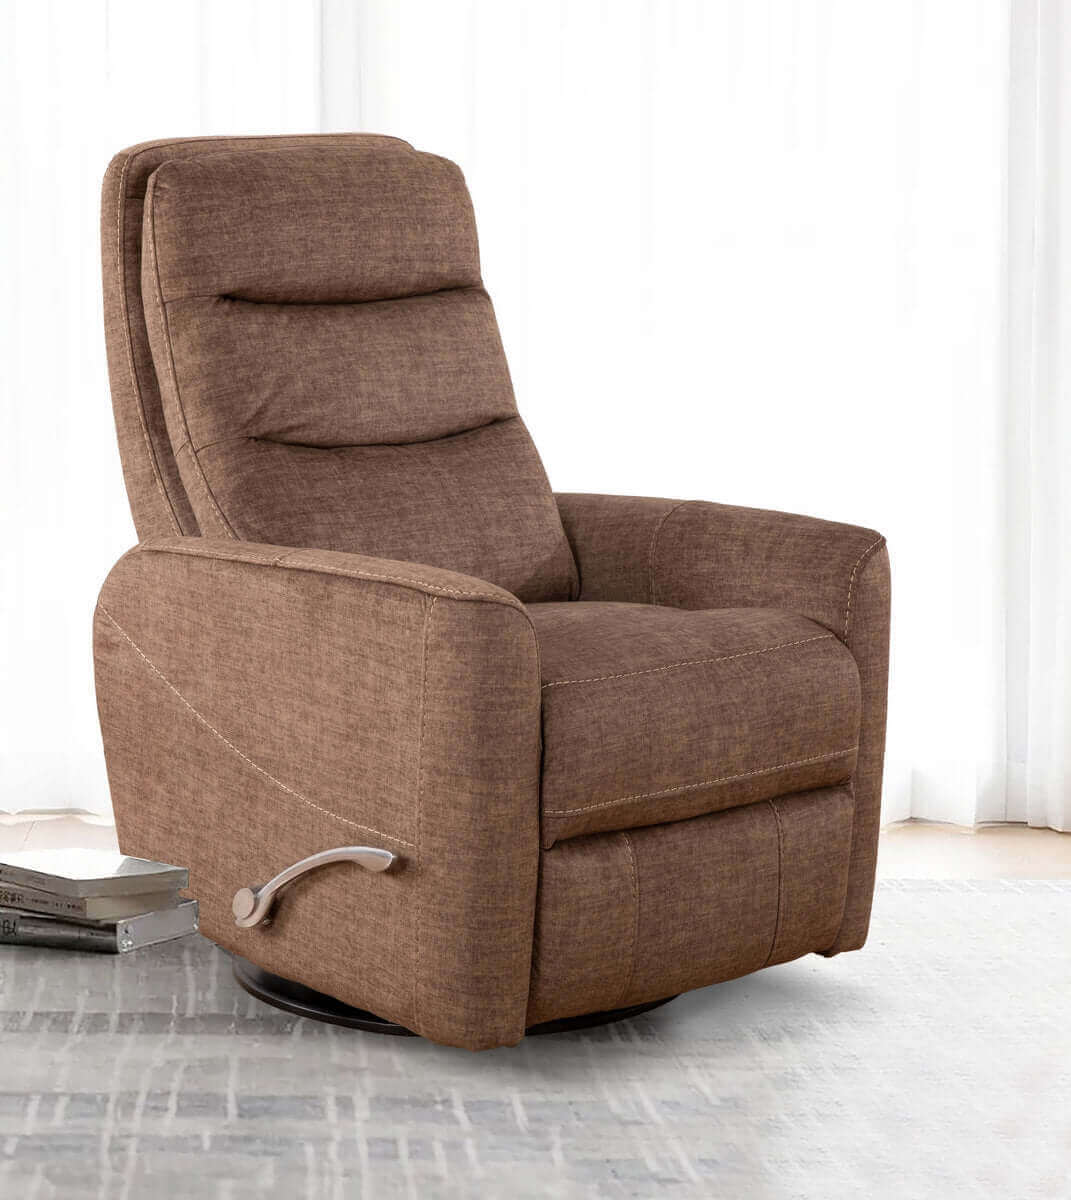 International Furniture Distribution Centre - Chocolate Fabric Manual Recliner Chair with Solid Hardwood Frame - IF 6322